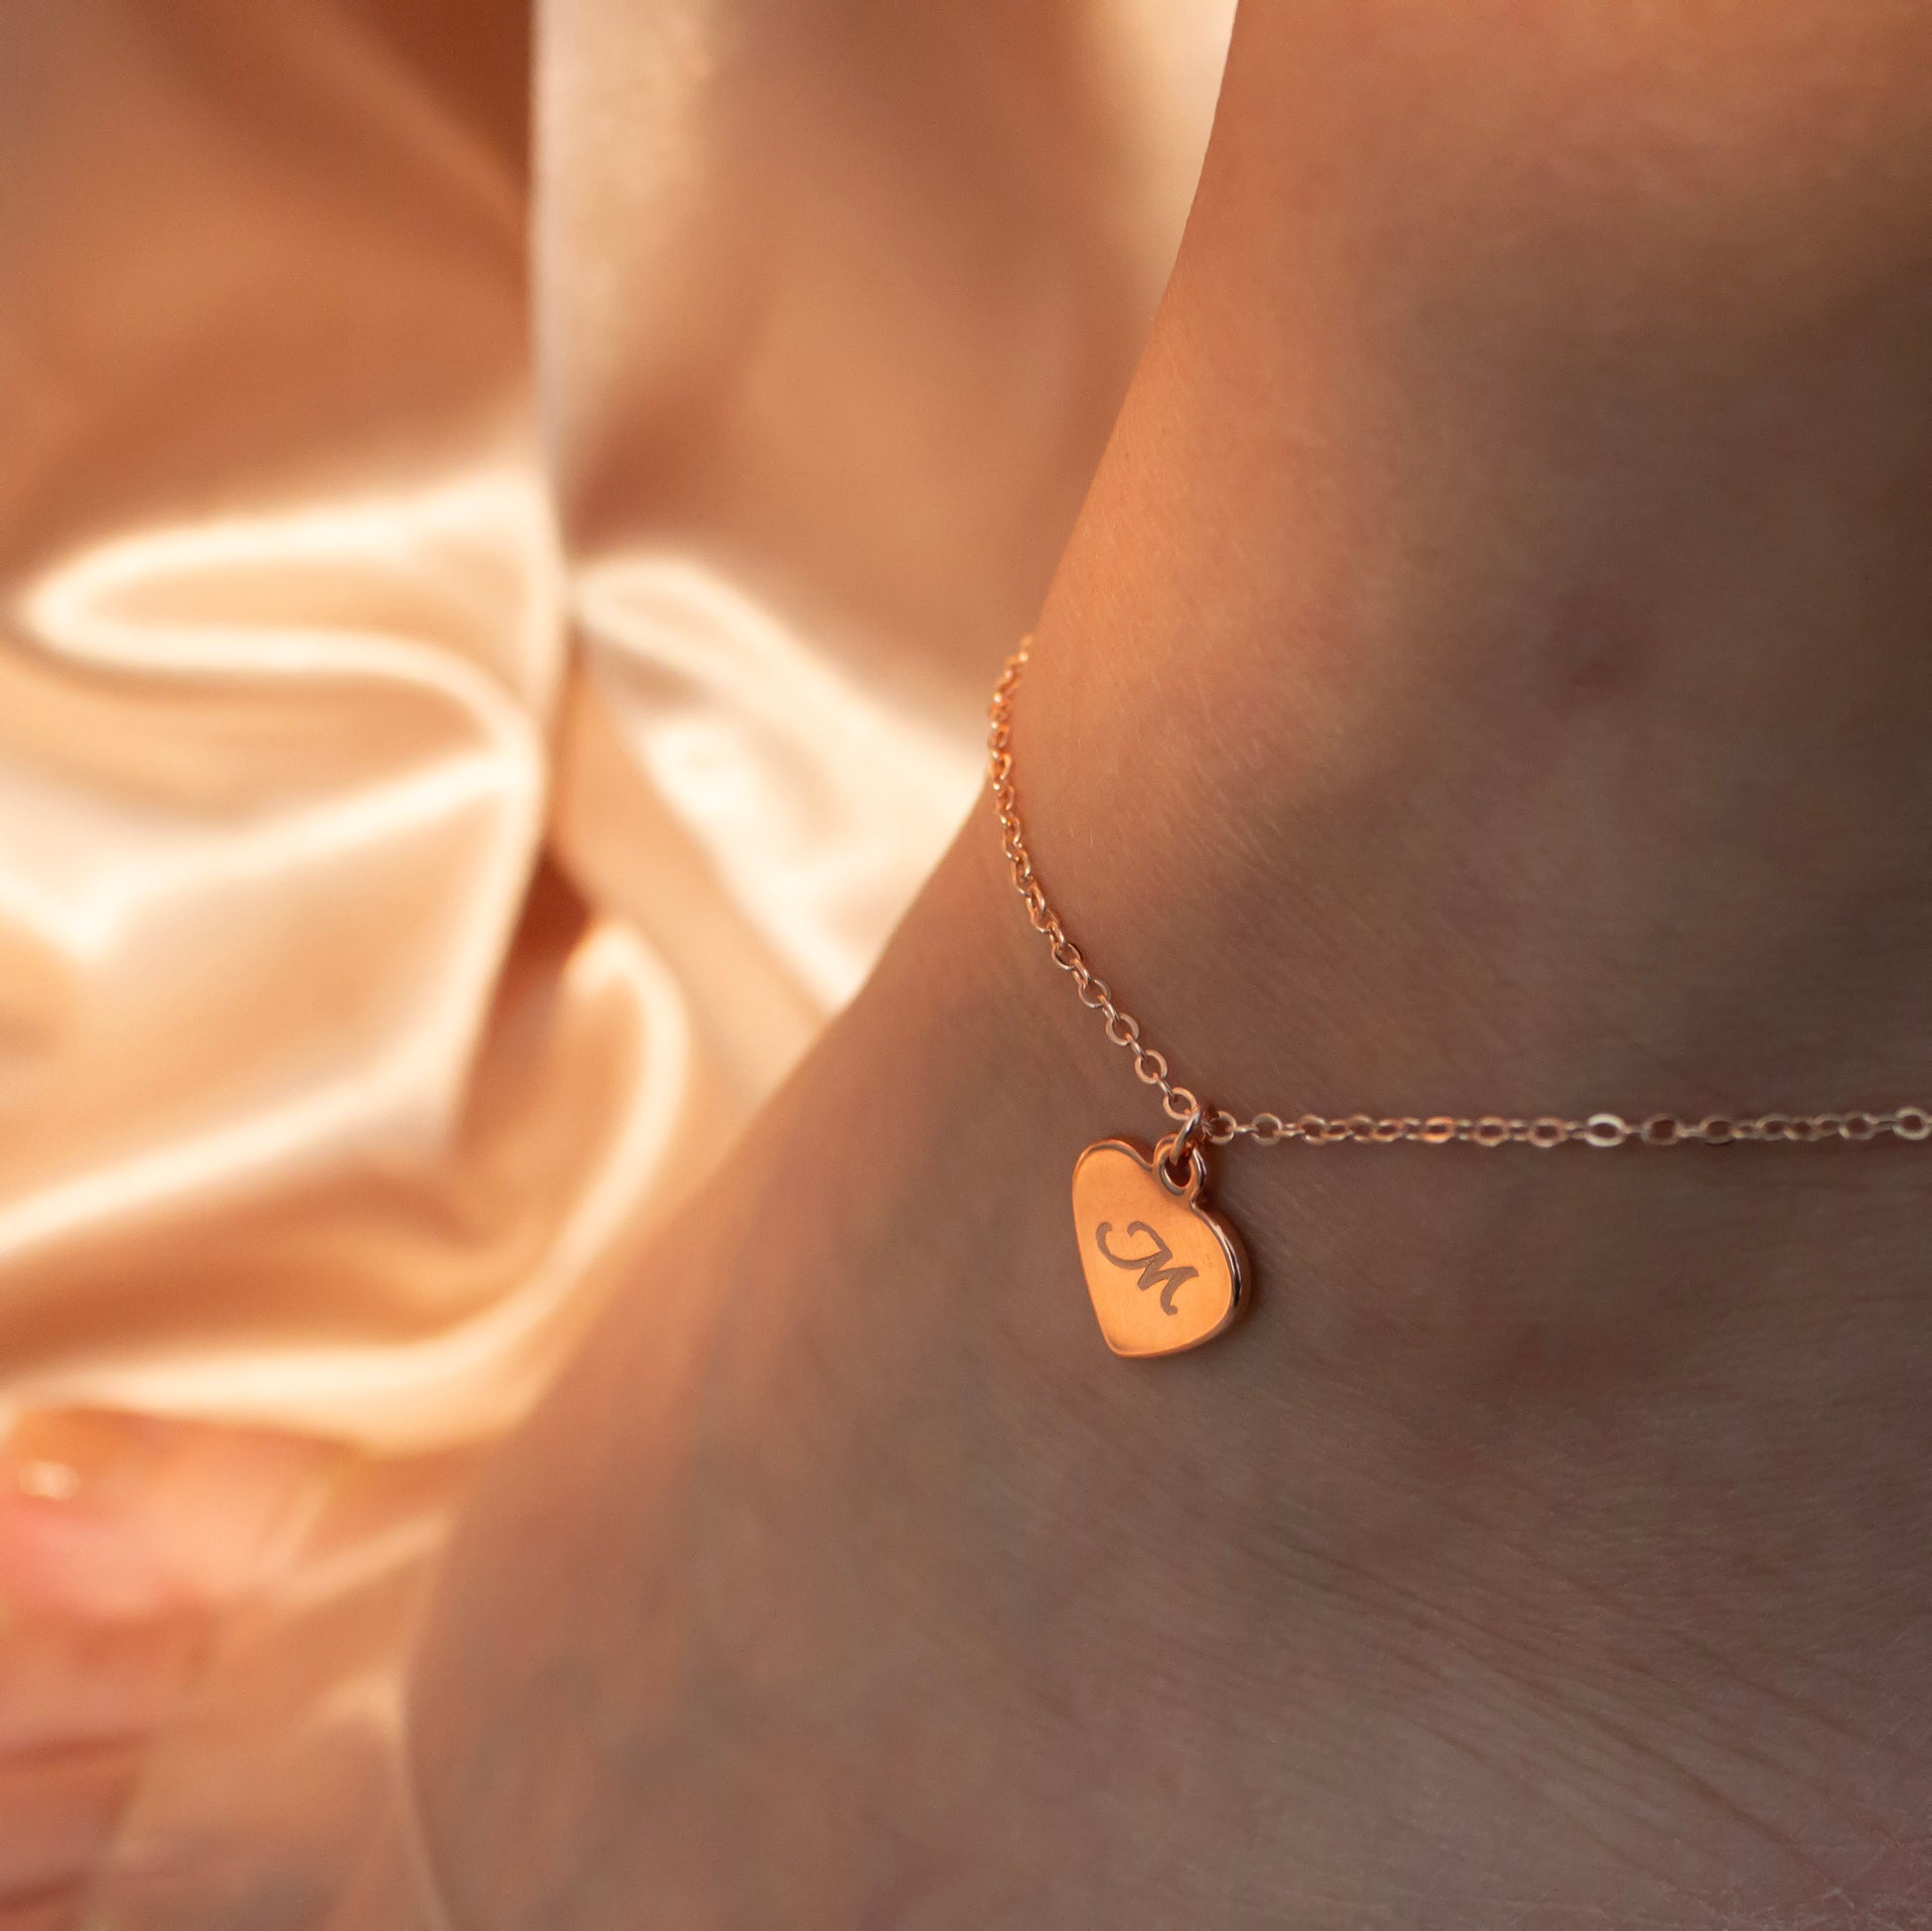 Buy Dainty 16K Gold Heart Anklet for Summer at Petite Boutique